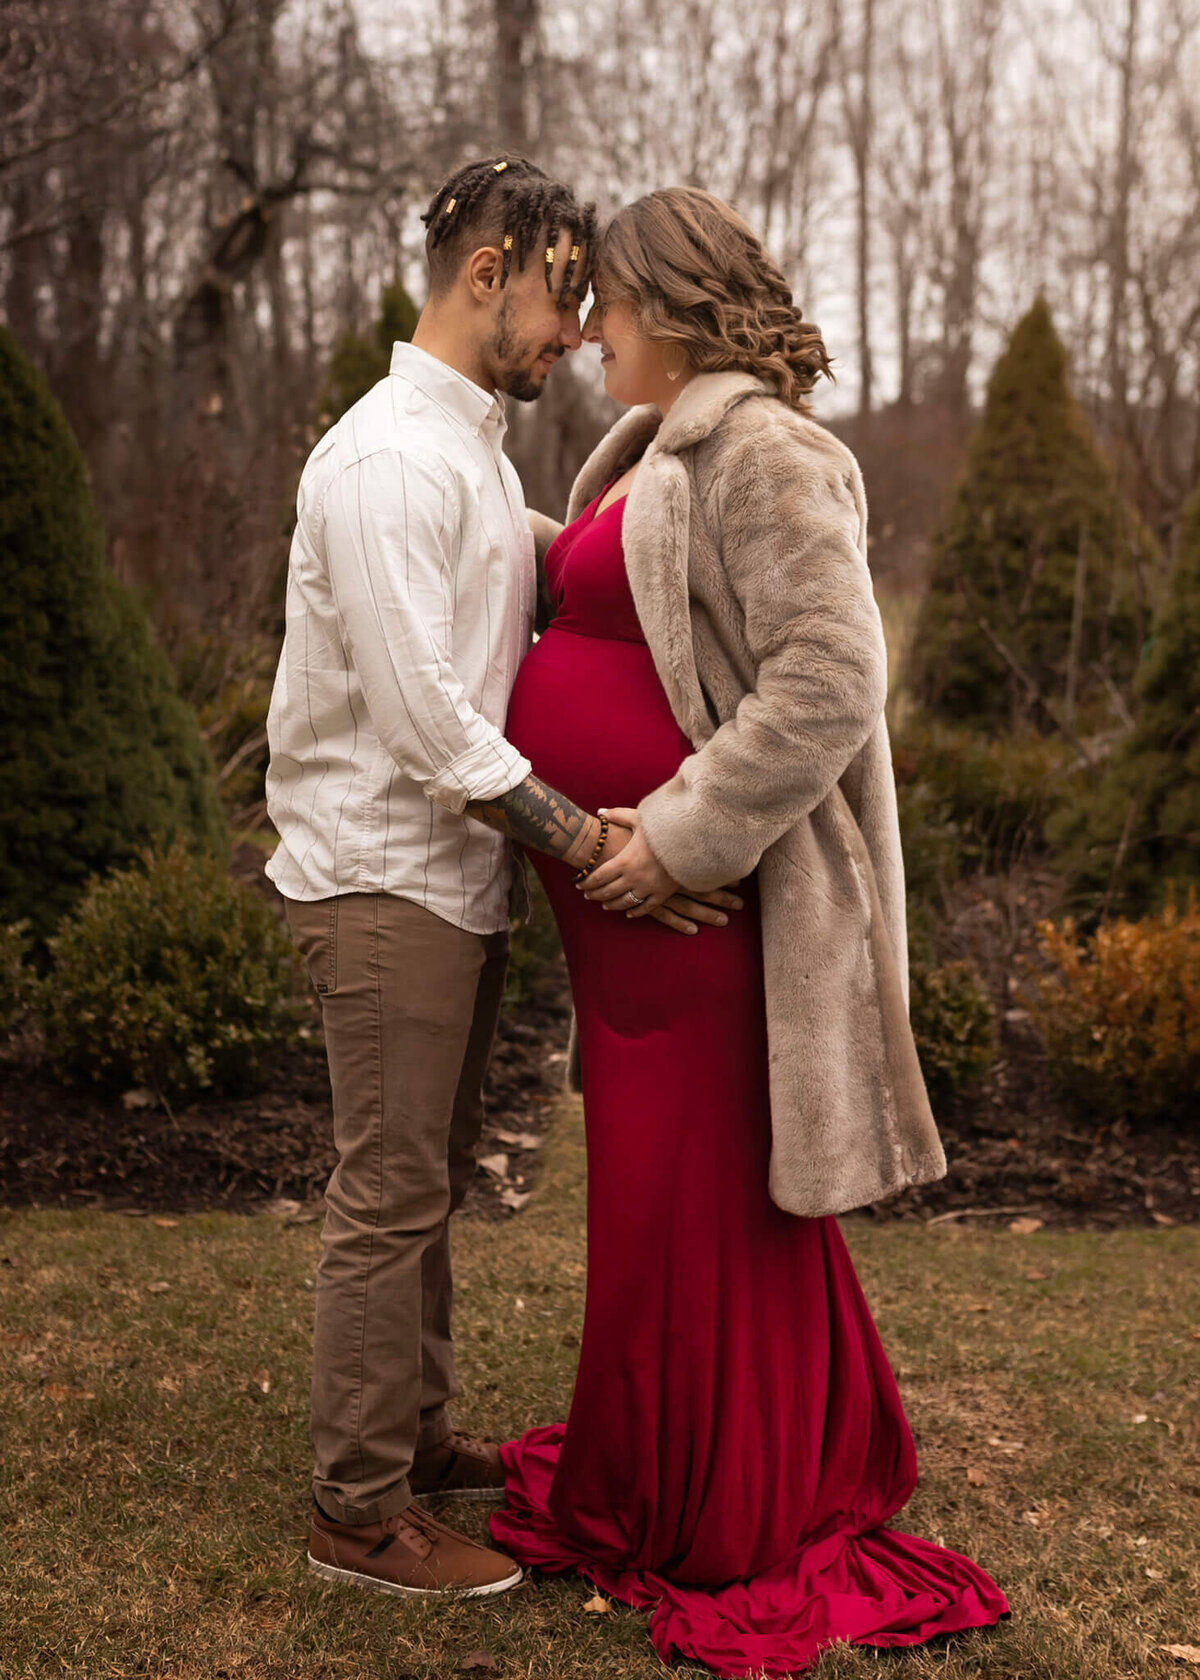 NJ maternity photographer poses couple outdoors for a photo